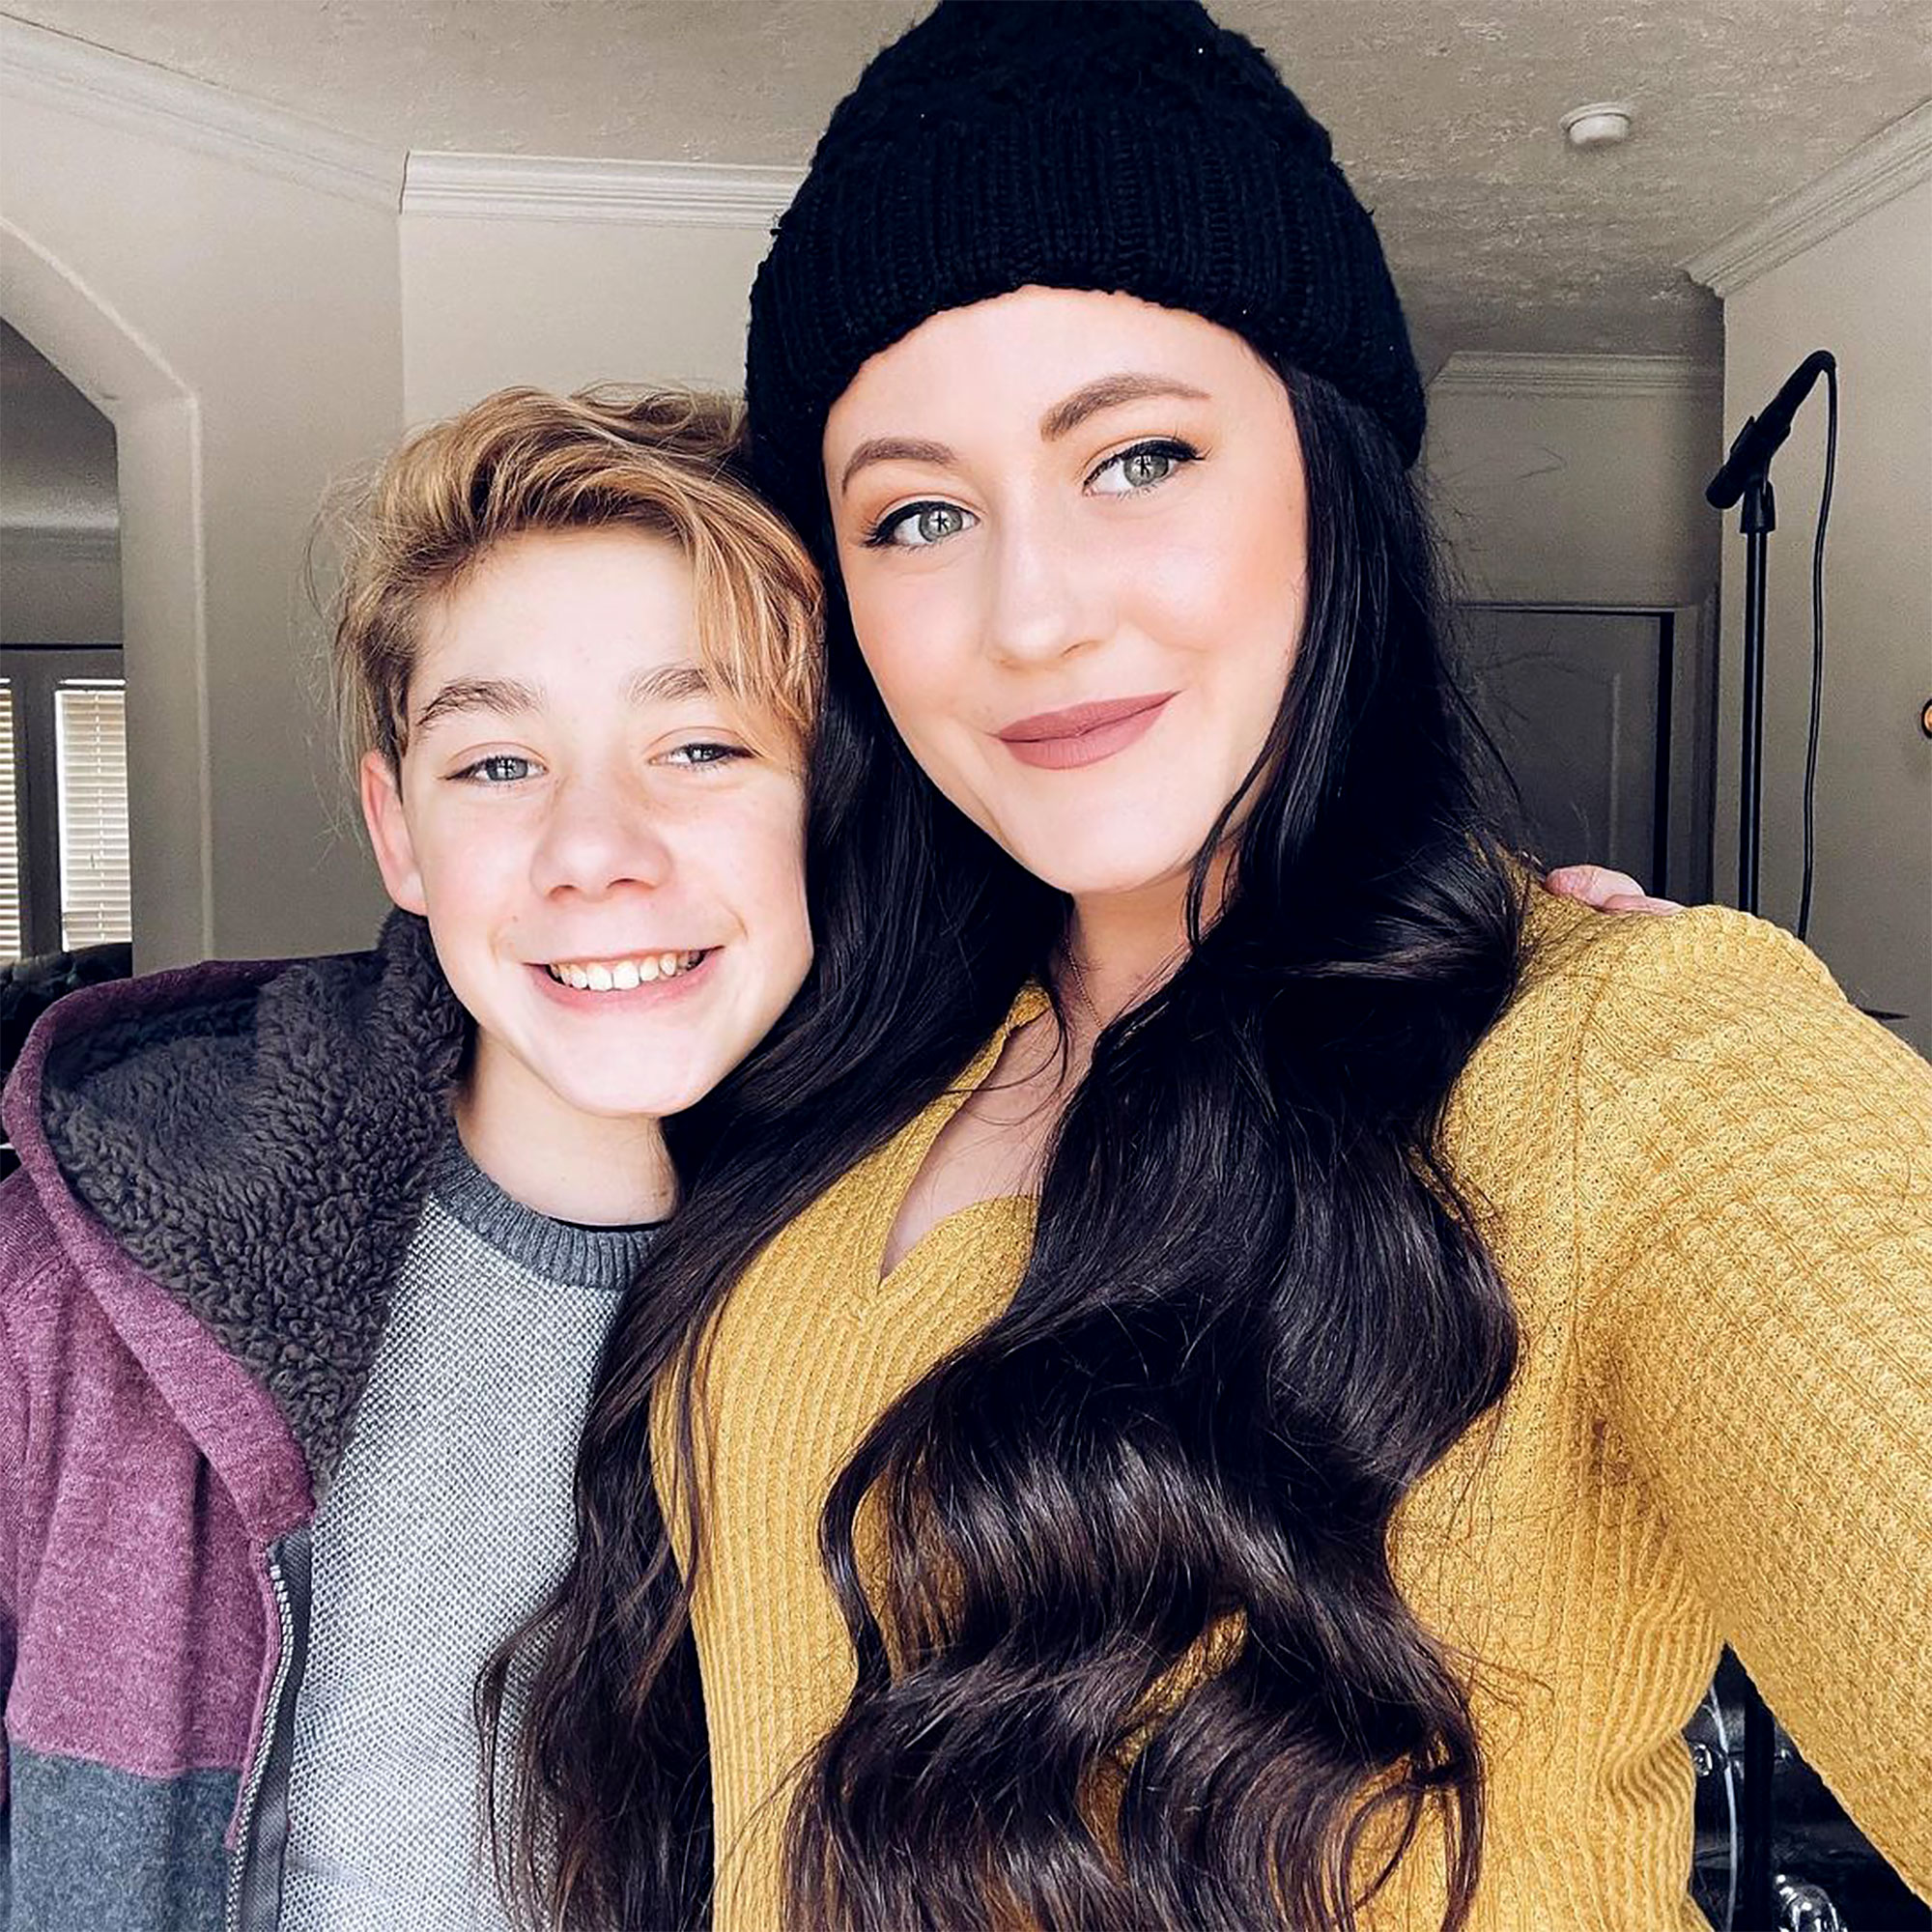 Teen Mom 2s Jenelle Evans Son Jace, 12, Looks Grown Up New Photos pic